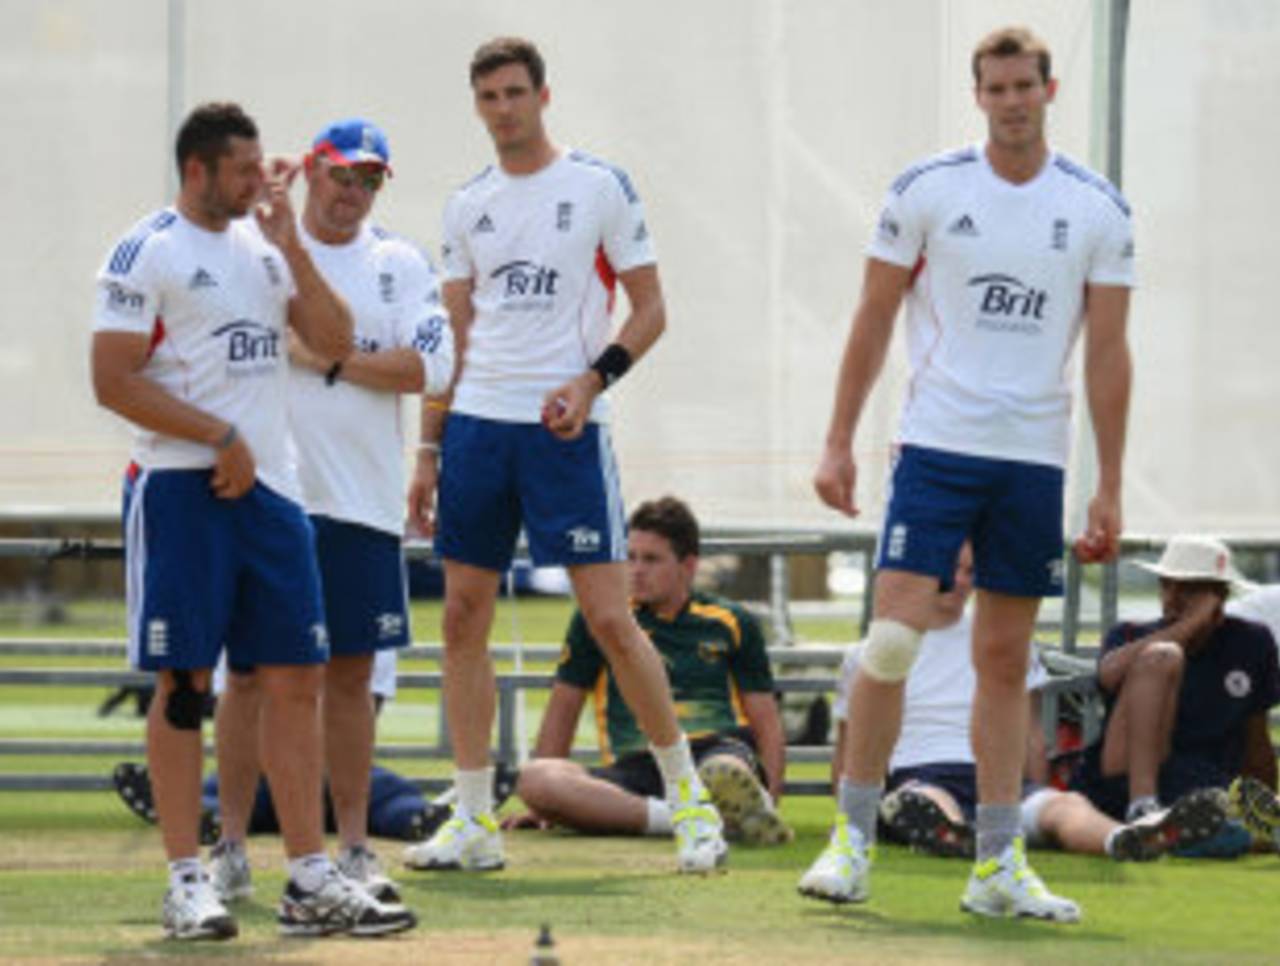 With Tim Bresnan unlikely for the first Test, Steven Finn and Chris Tremlett, along with Boyd Rankin, are competing for the third pace bowler's spot&nbsp;&nbsp;&bull;&nbsp;&nbsp;Getty Images